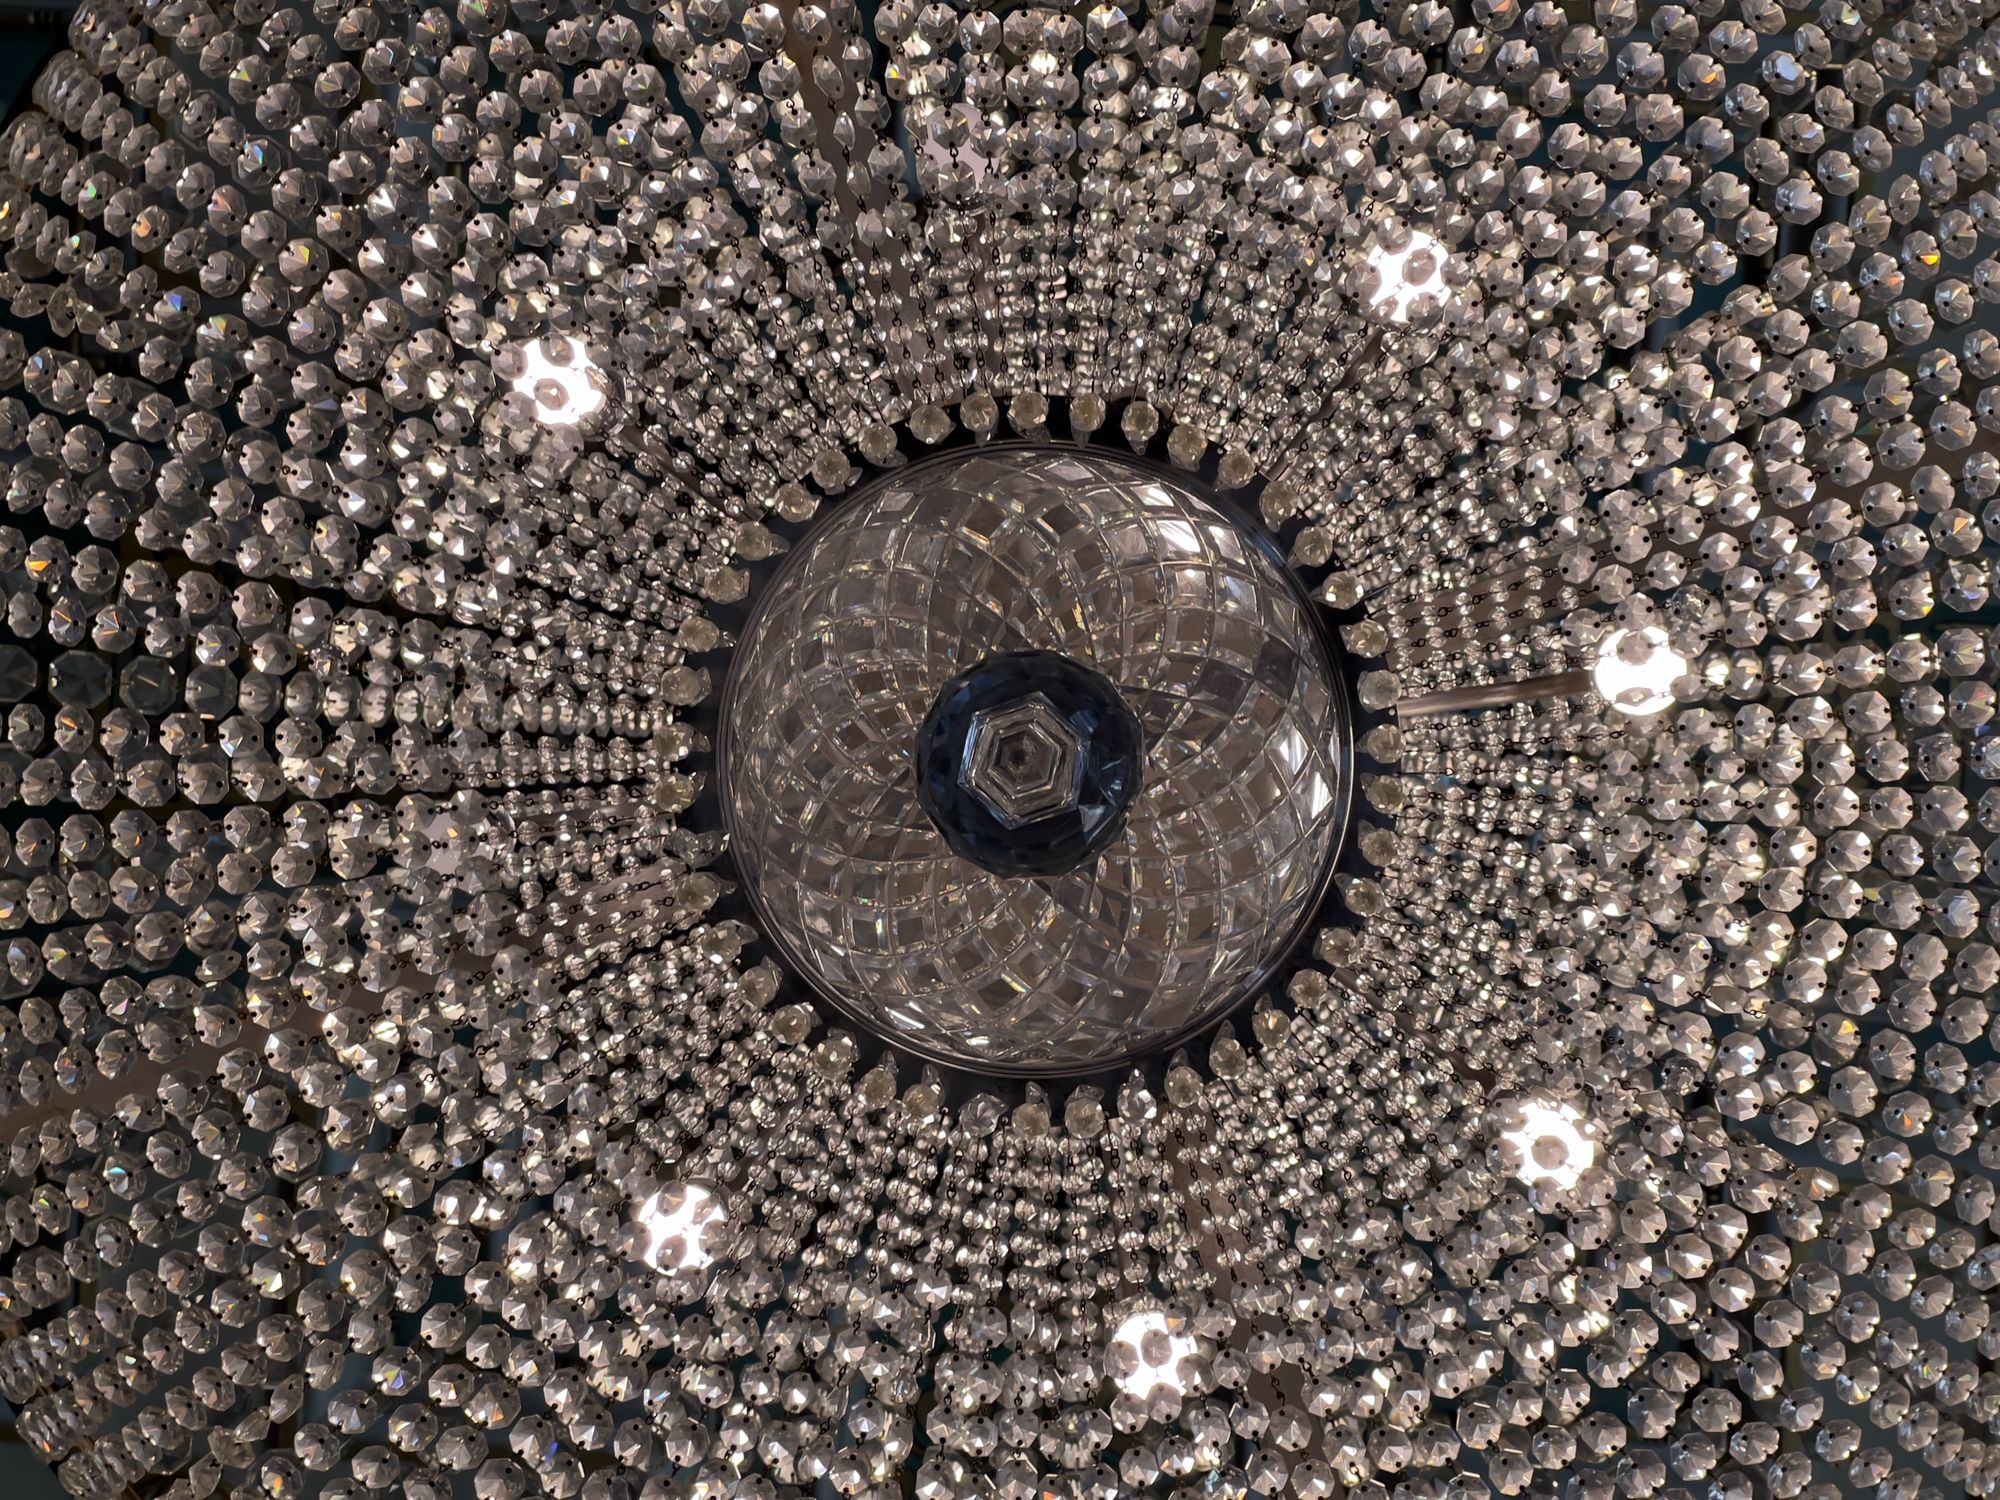 An ornate chandelier photographed from below with a big glass sphere in the centre and lots of little ones radiating out.